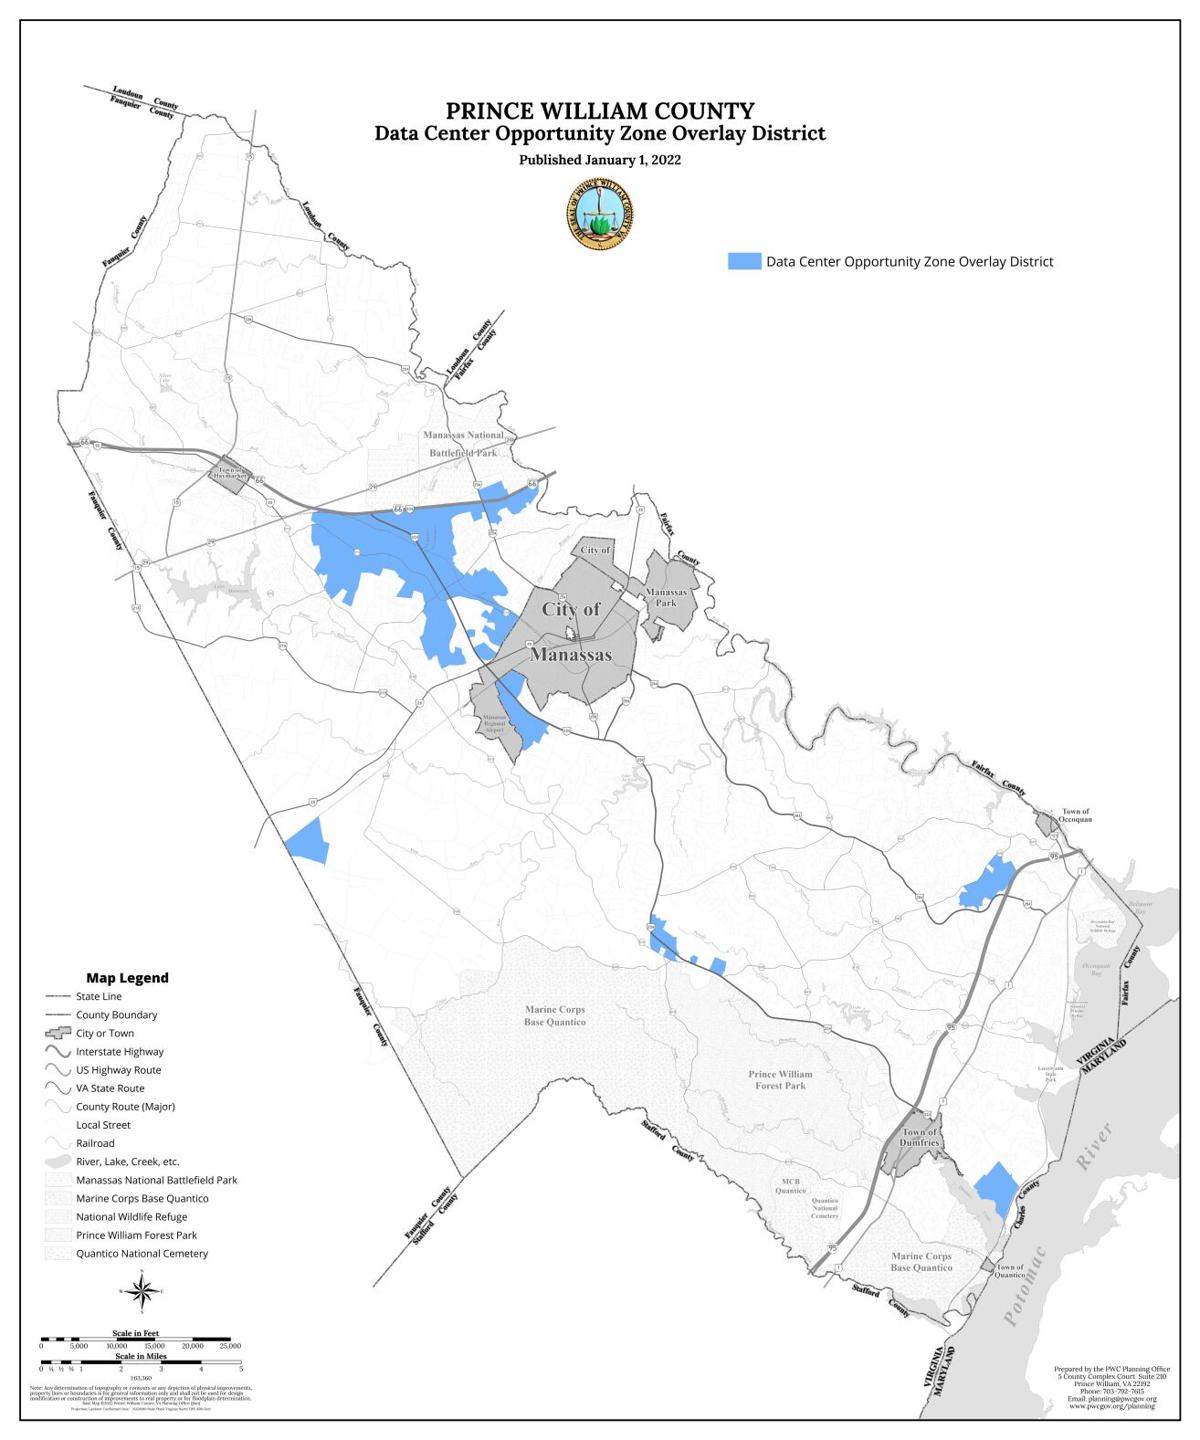 Prince William County's Data Center Overlay Opportunity Distirict